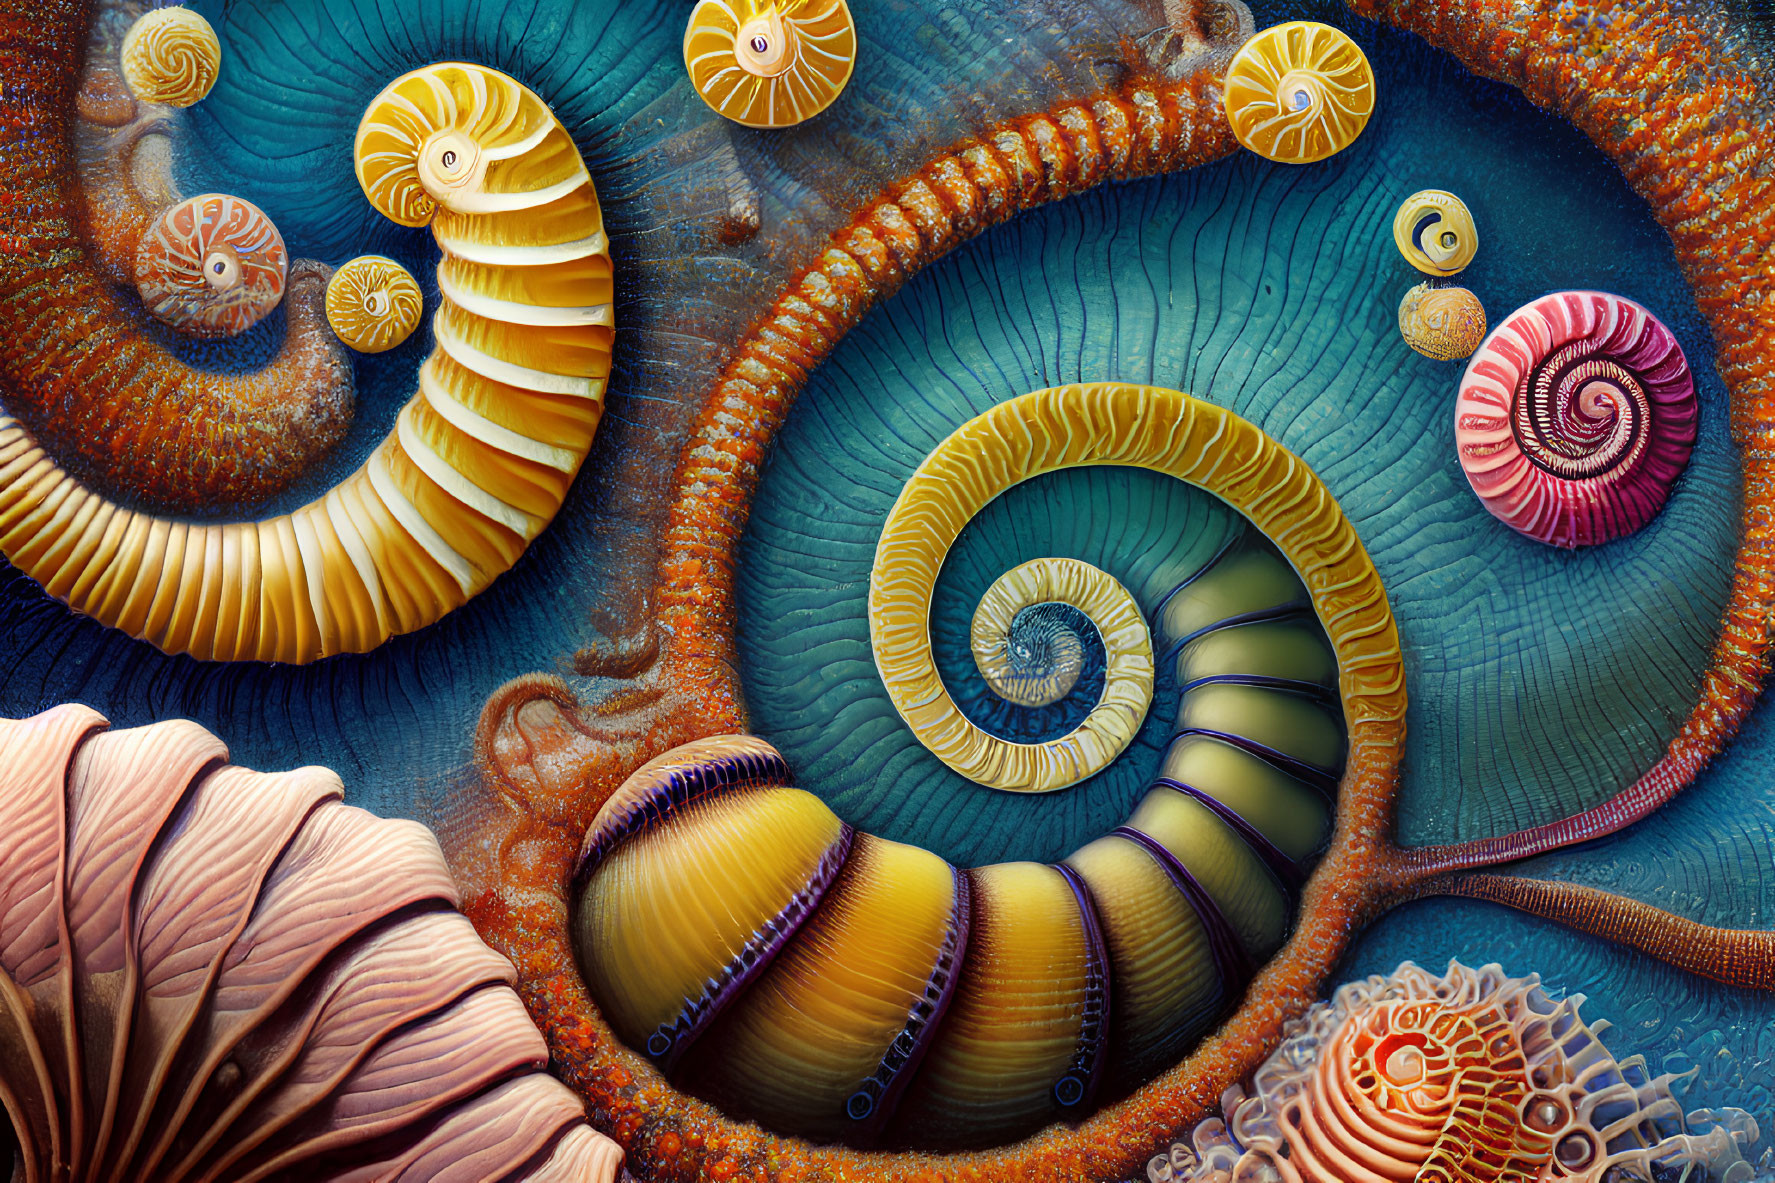 Colorful Sea Shells and Ammonite Fossils Illustration on Textured Blue Background